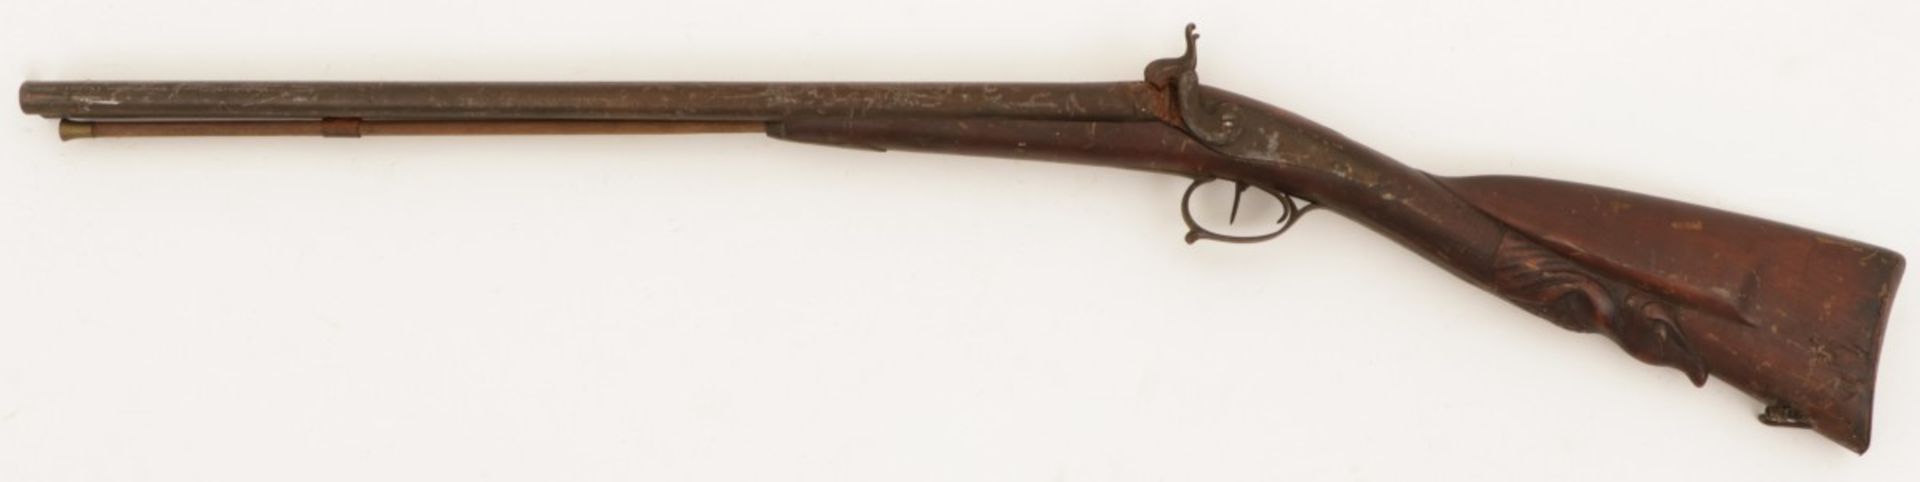 A double barrel percussion hunting rifle, 19th century.